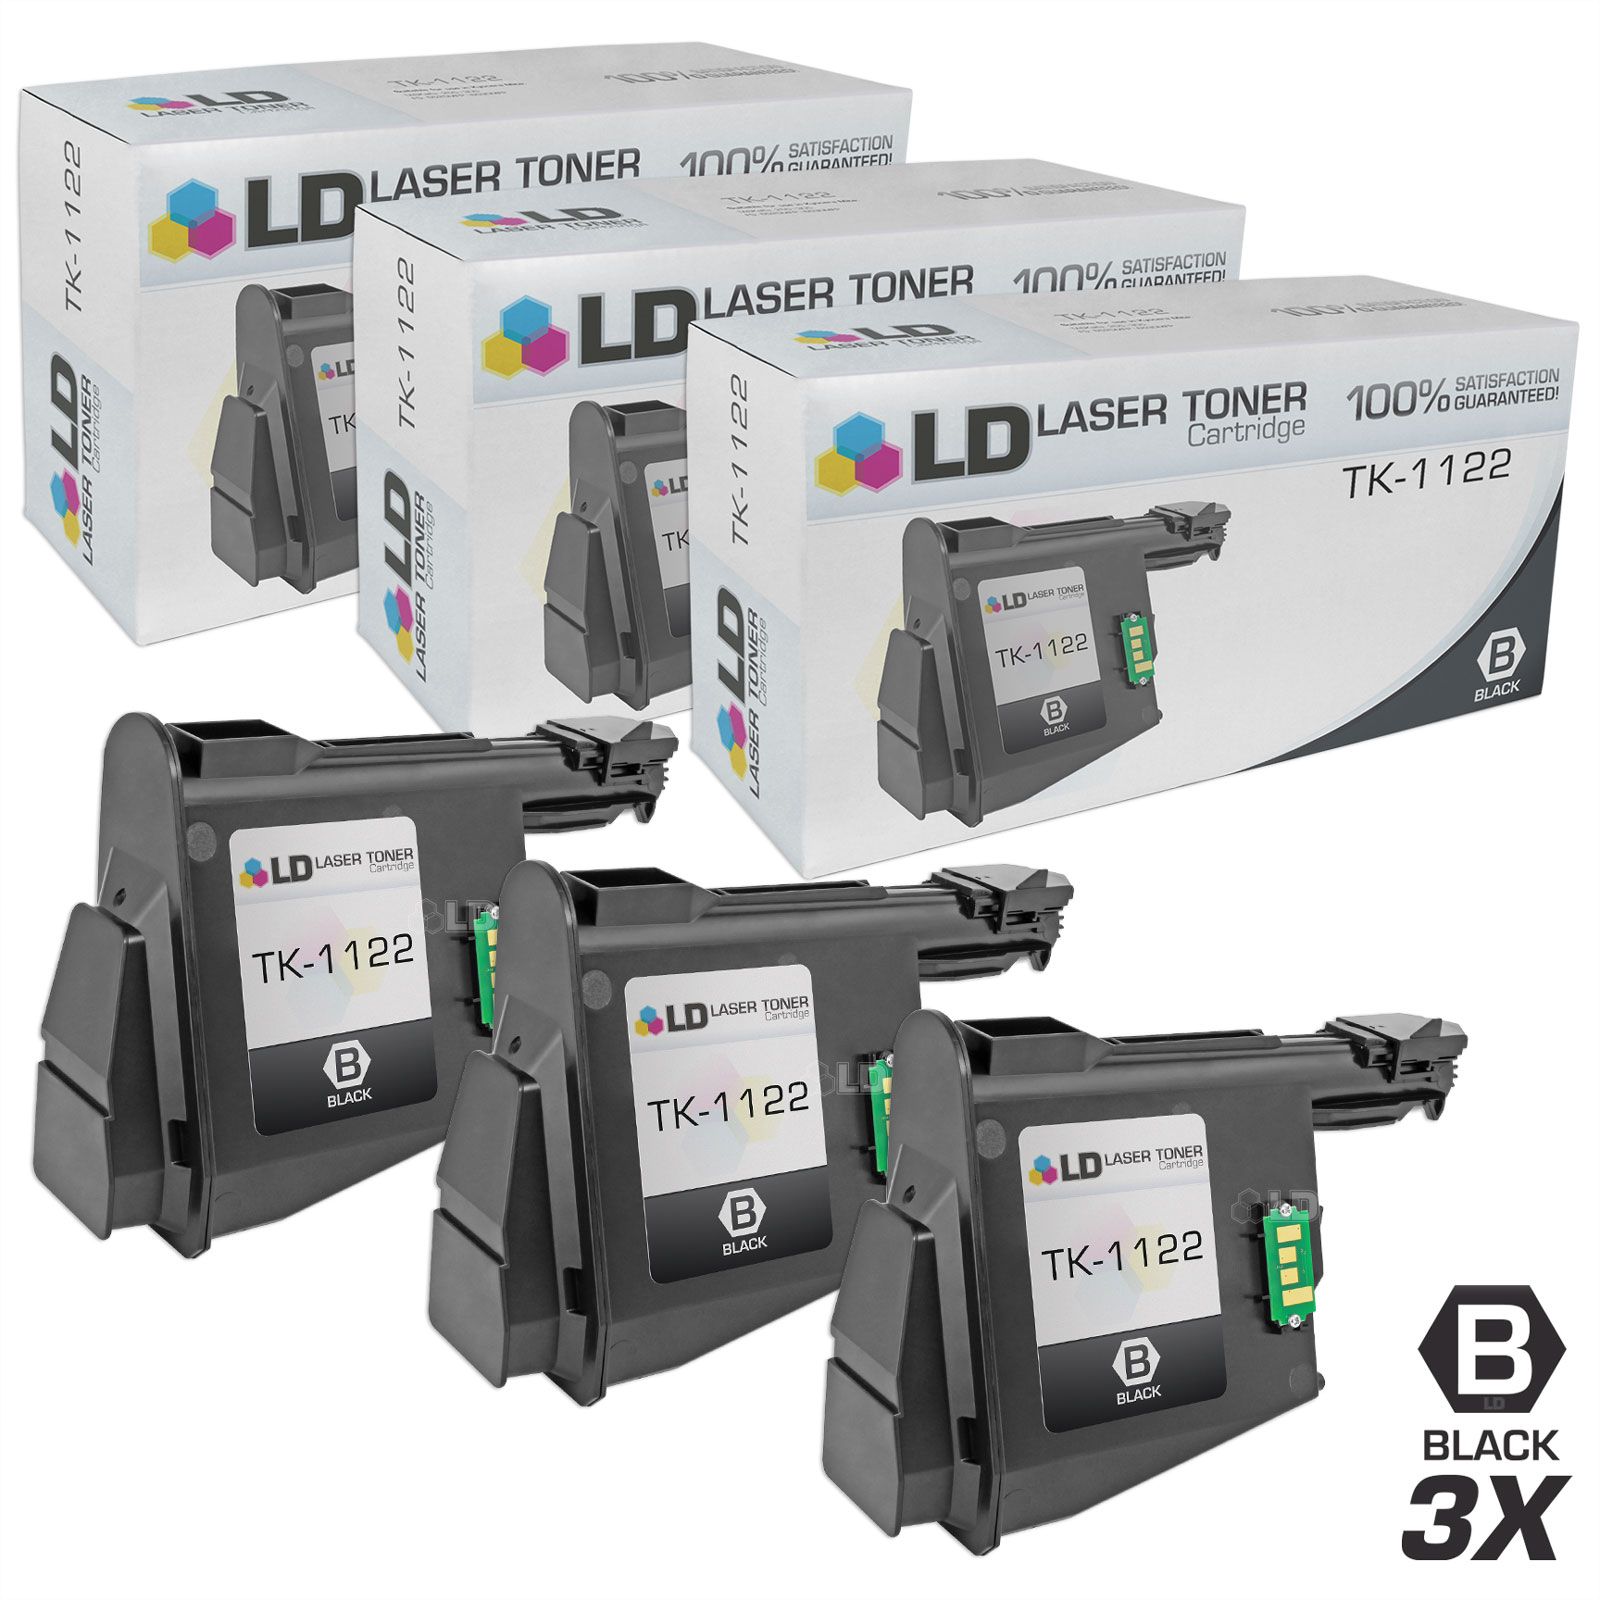 LD Compatible Replacements for Kyocera-Mita 1T02M70UX0 (TK1122) Set of 3 Black Laser Toner Cartridges for use in Kyocera-Mita FS 1025MFP, 1060DN, and 1125MFP s - image 1 of 1